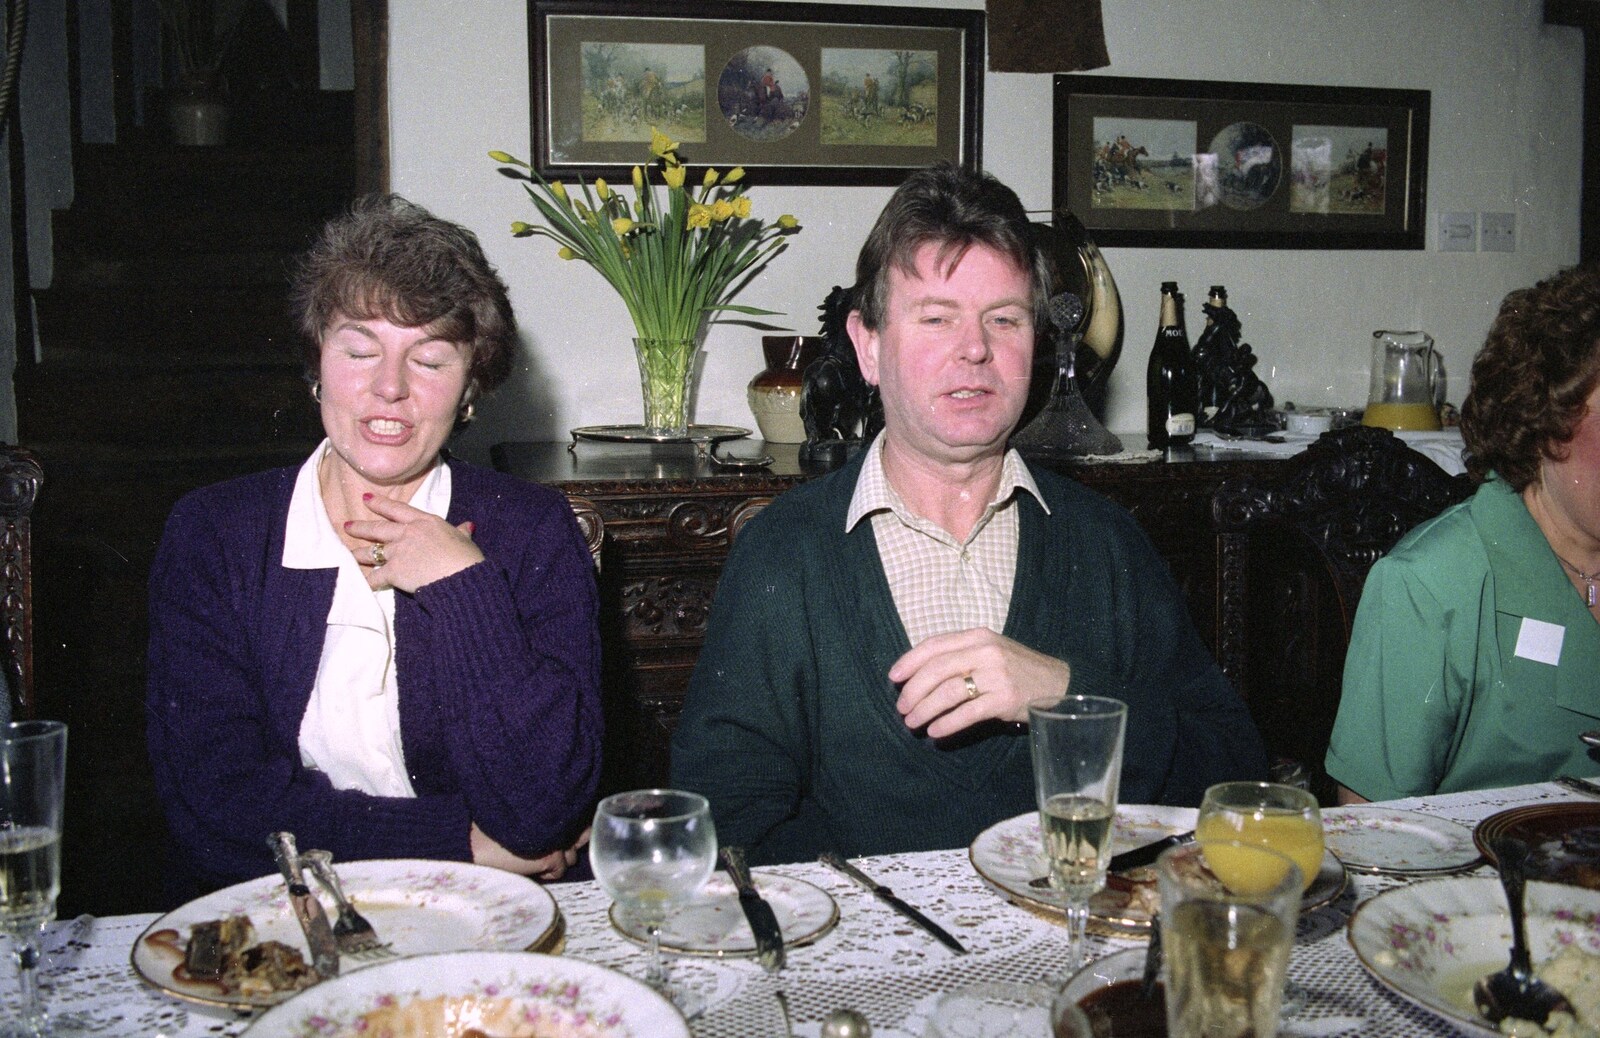 Badger and Mick from Dinner Round Geoff and Brenda's, and Hamish Visits, Stuston, Suffolk - 6th April 1992